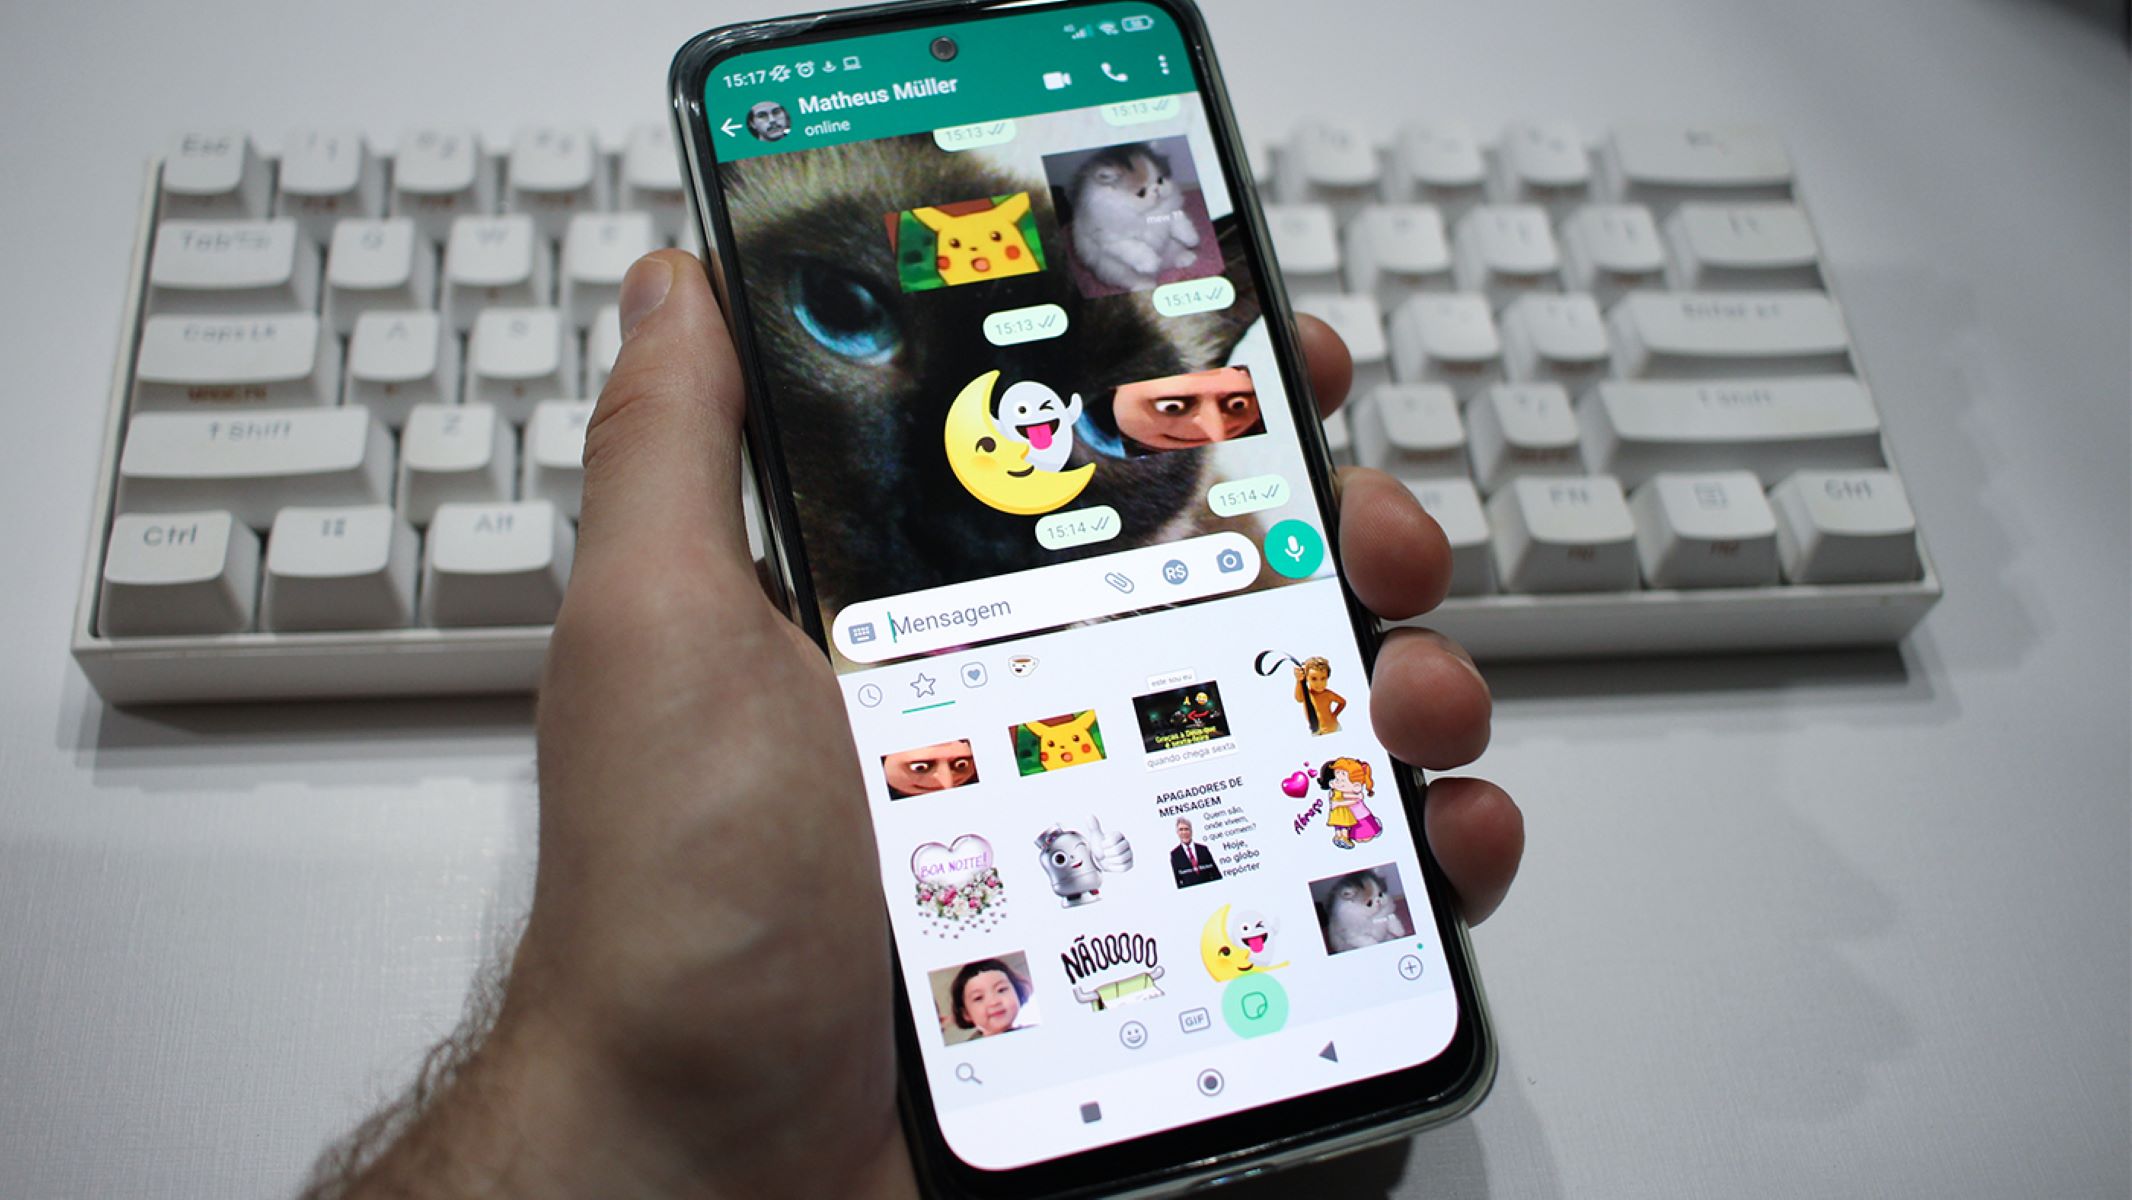 Crafting WhatsApp Stickers On Your IPhone: Step-by-Step Guide